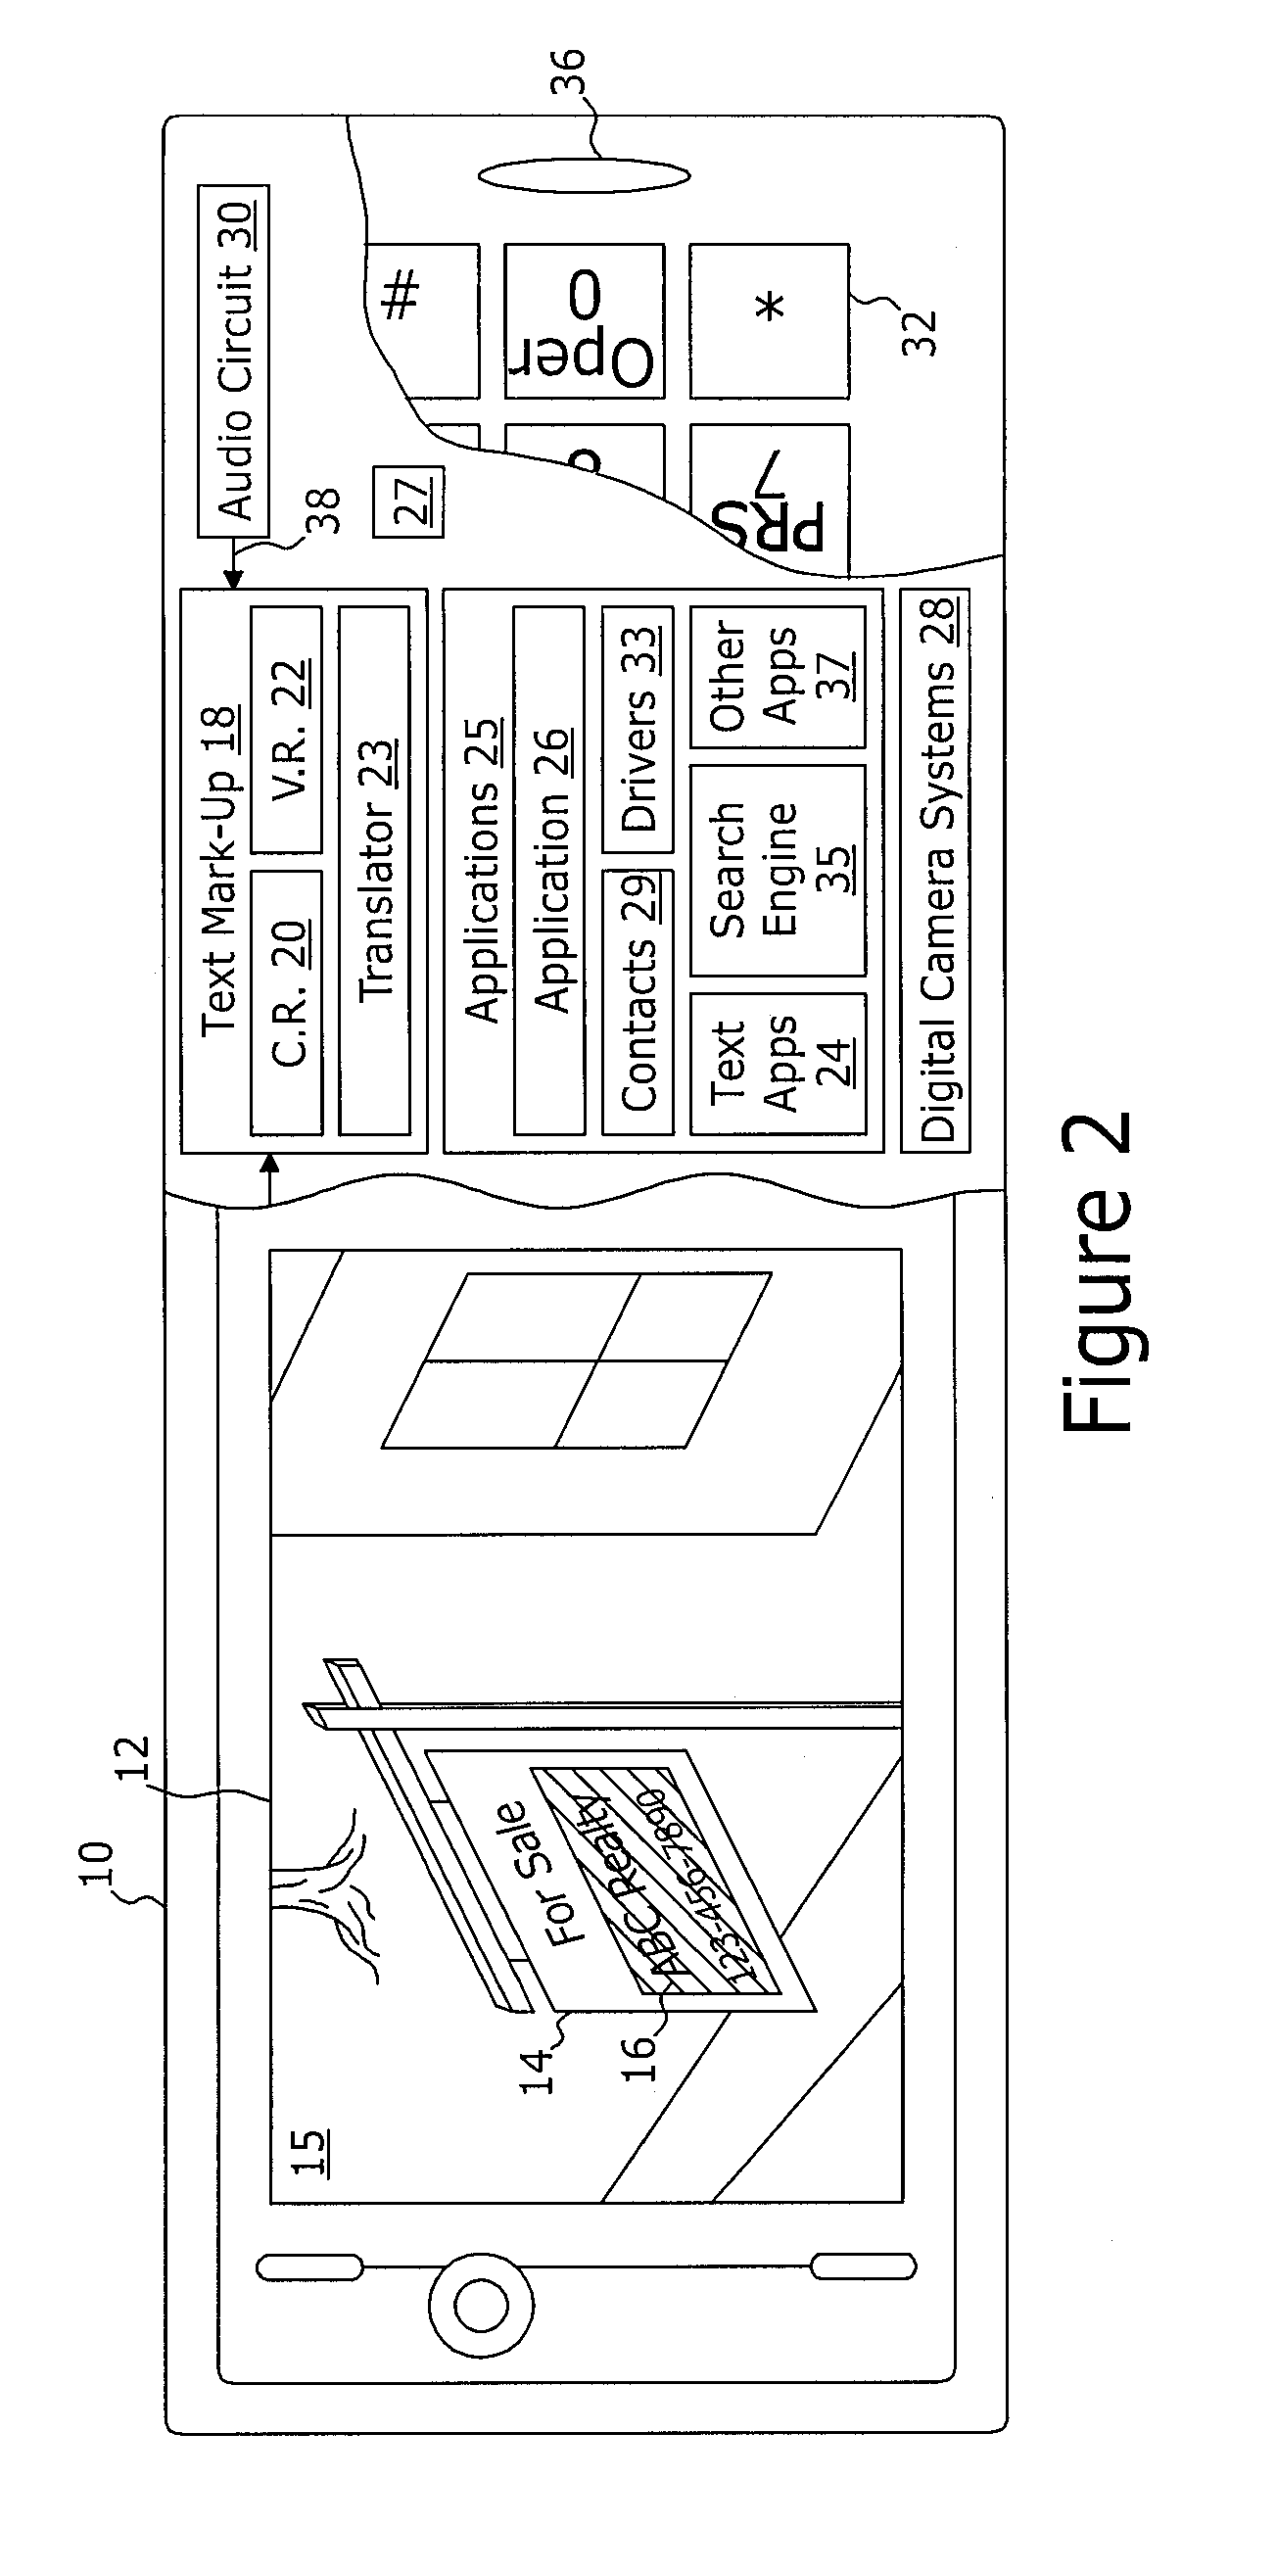 System and method for input of text to an application operating on a device